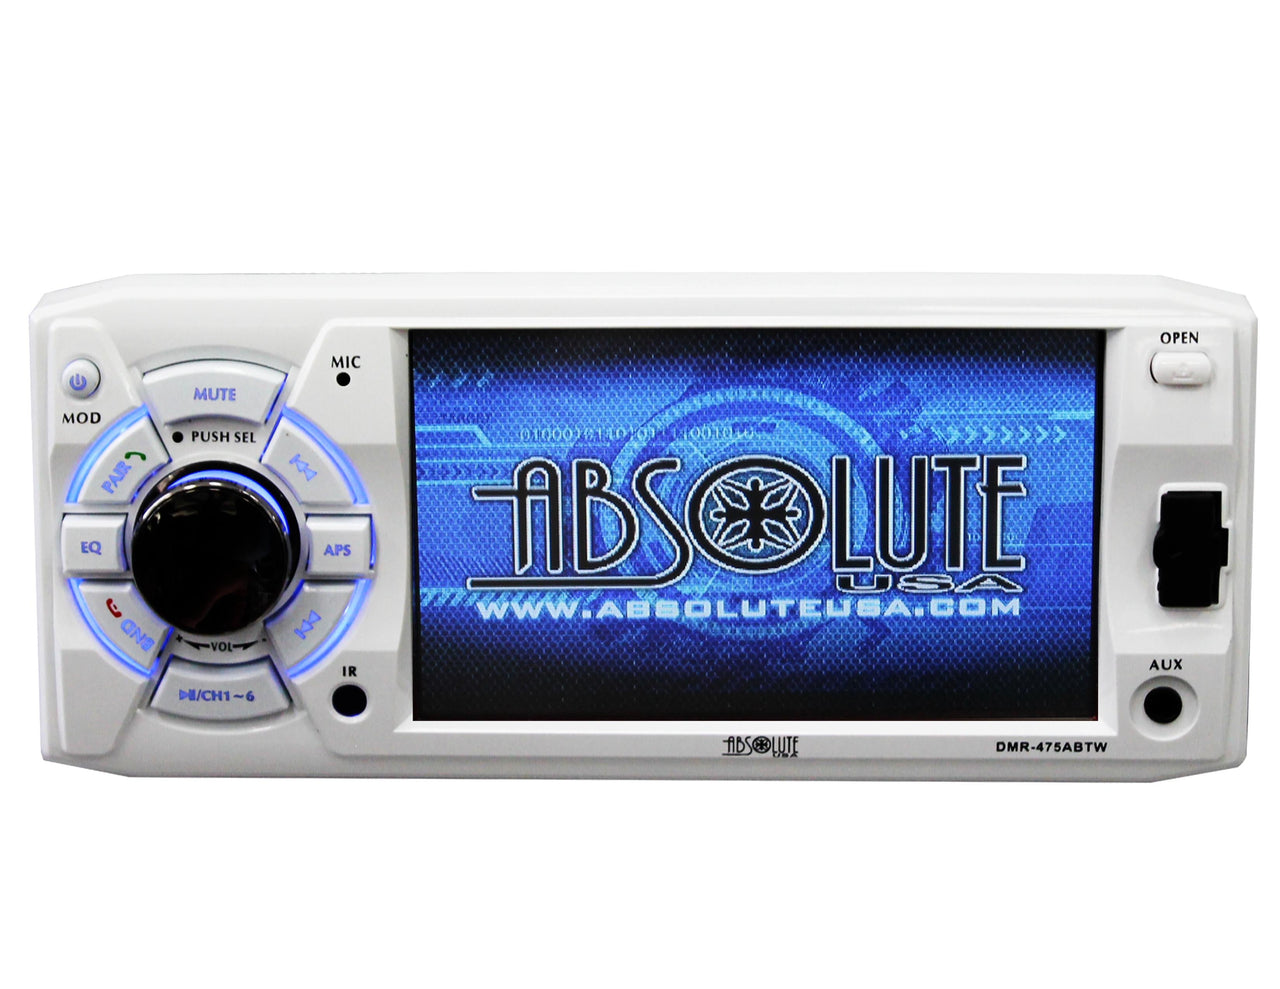 Absolute USA DMR-475ABTW 4.8-Inch DVD/MP3/CD Multimedia Player with USB, SD Card, Built-in Bluetooth